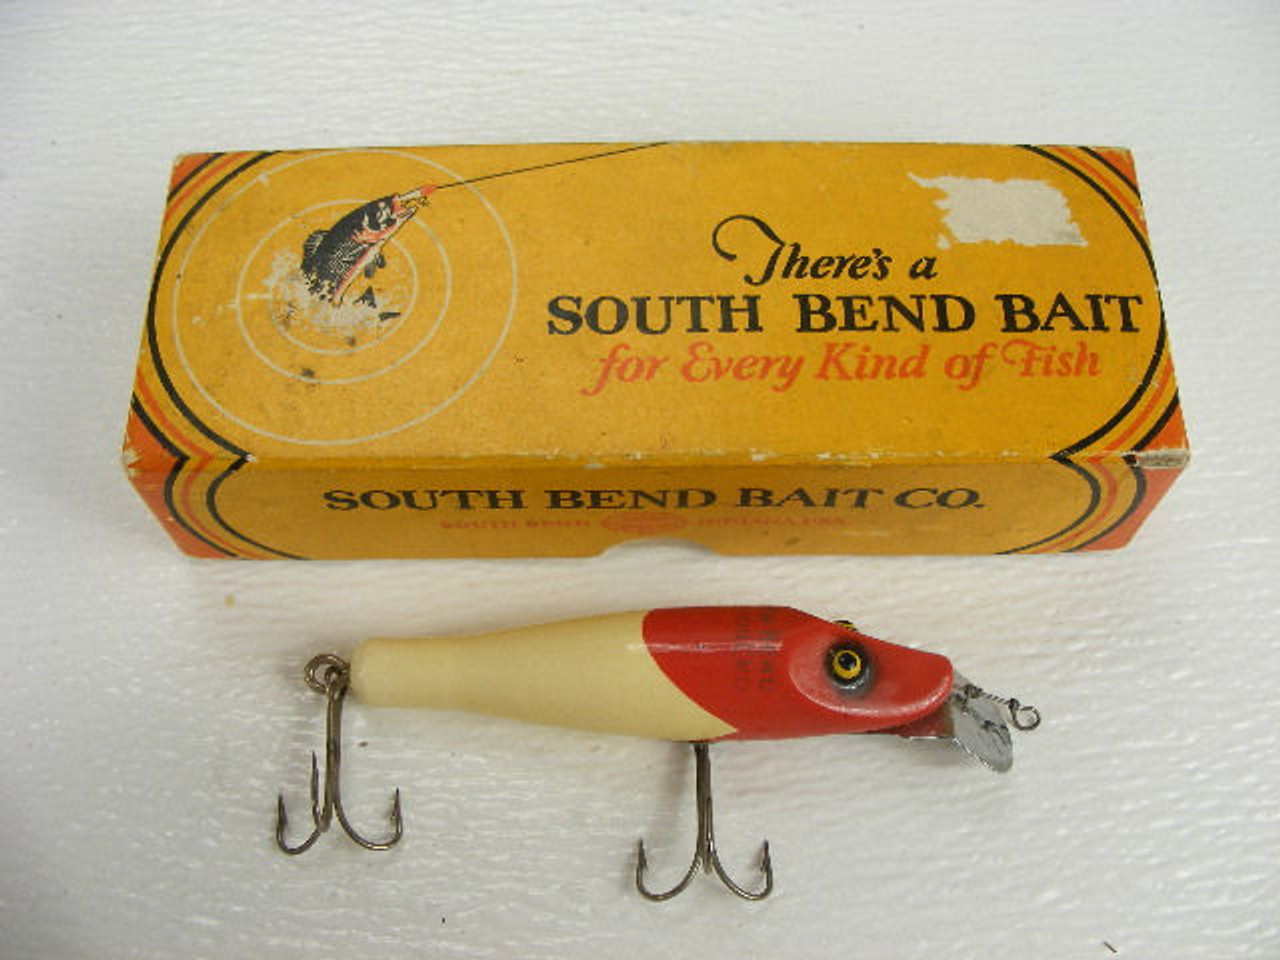 This 4 old South Bend Pike-Oreno wooden lure comes with the original box.